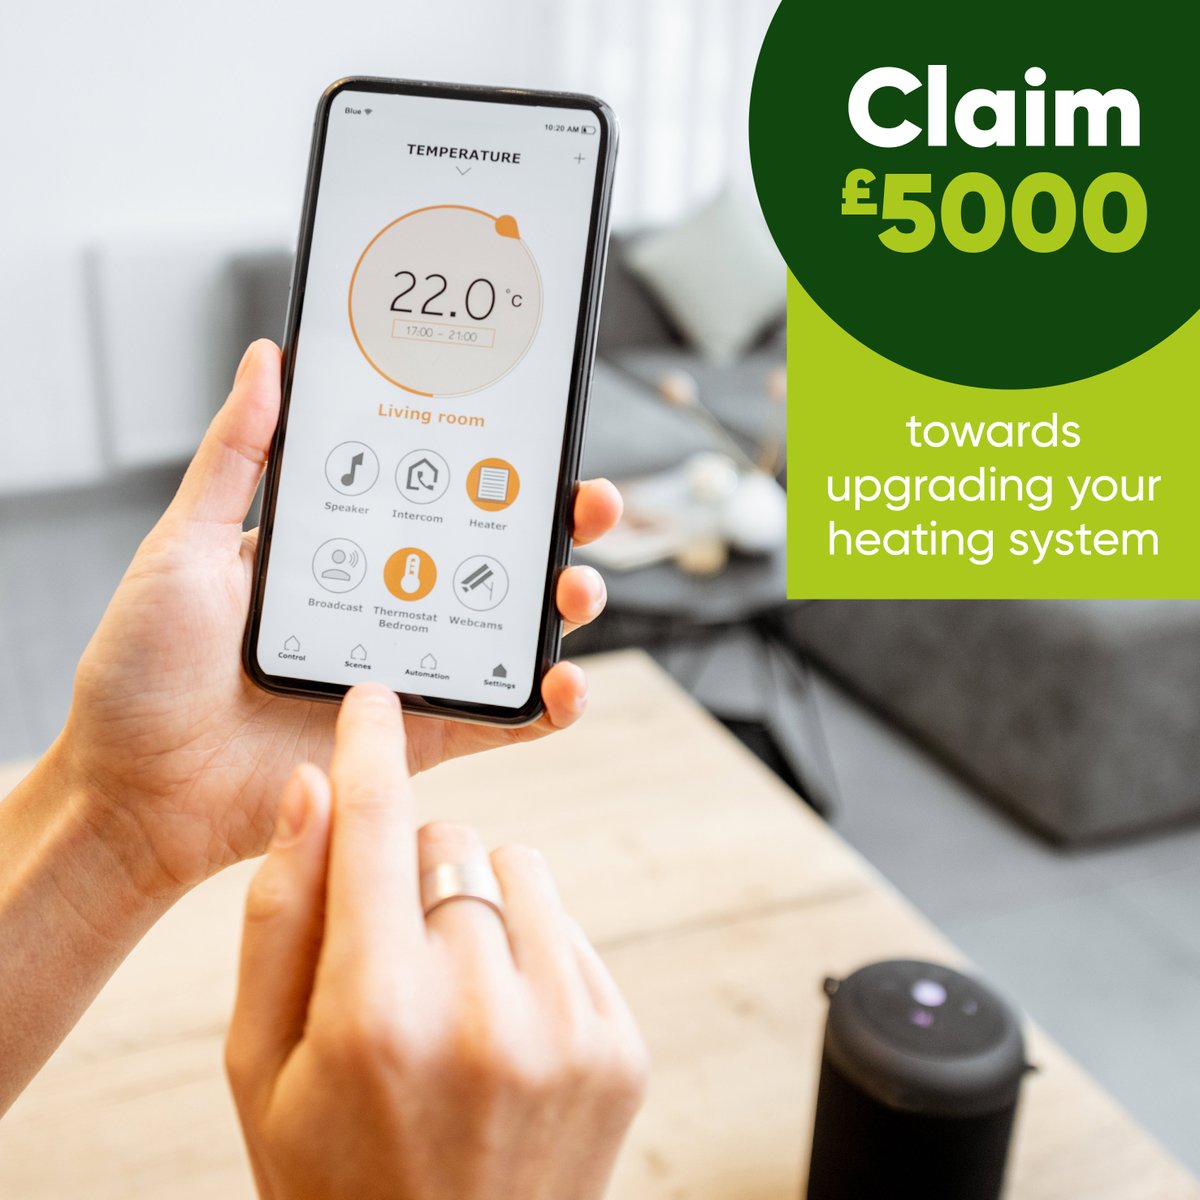 Through the Boiler Upgrade Scheme, you can get a grant to cover part of the cost of replacing fossil fuel heating systems with a Heat Pump.
​
greenerliving.co.uk/boiler-upgrade…
​
#airsourceheatpump #heatpump #heatpumps #heatpumpsystem #centralheating #heating #heatingsystem #homeheating